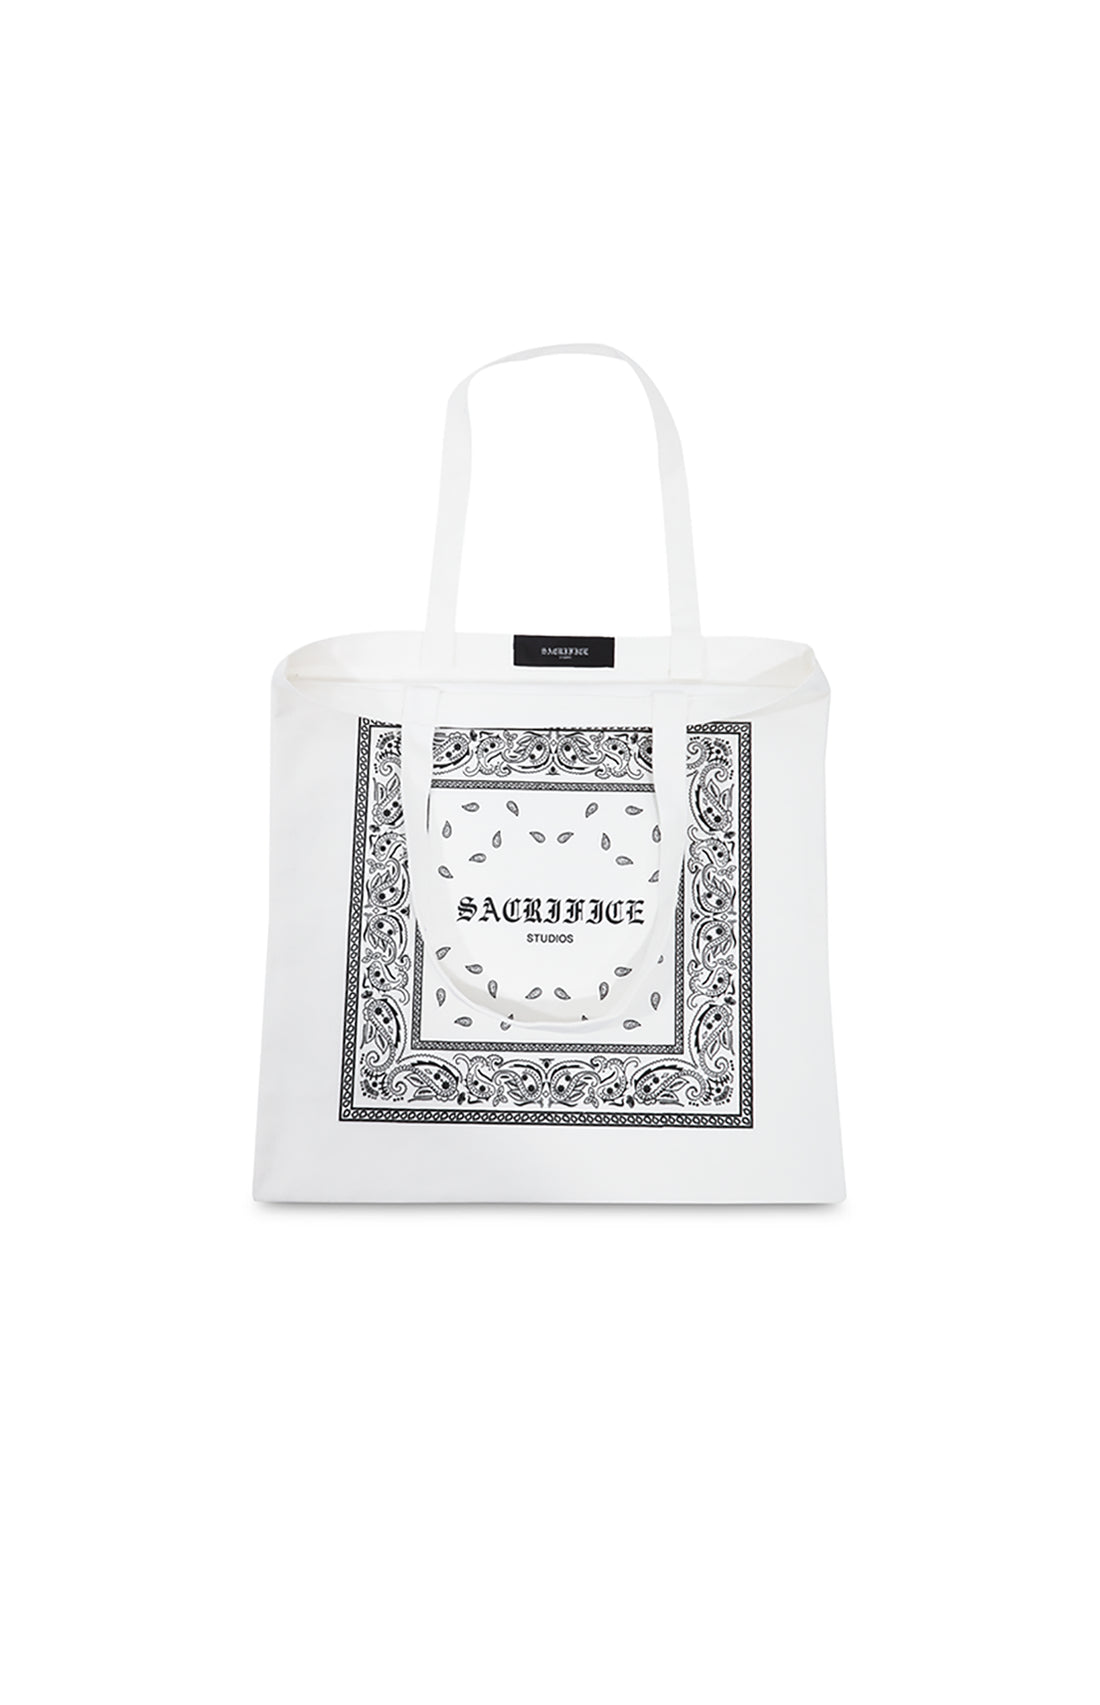 Premium bandana  tote bag featuring a bold white graphic print. Expertly crafted in Portugal. Located in Dubai. 